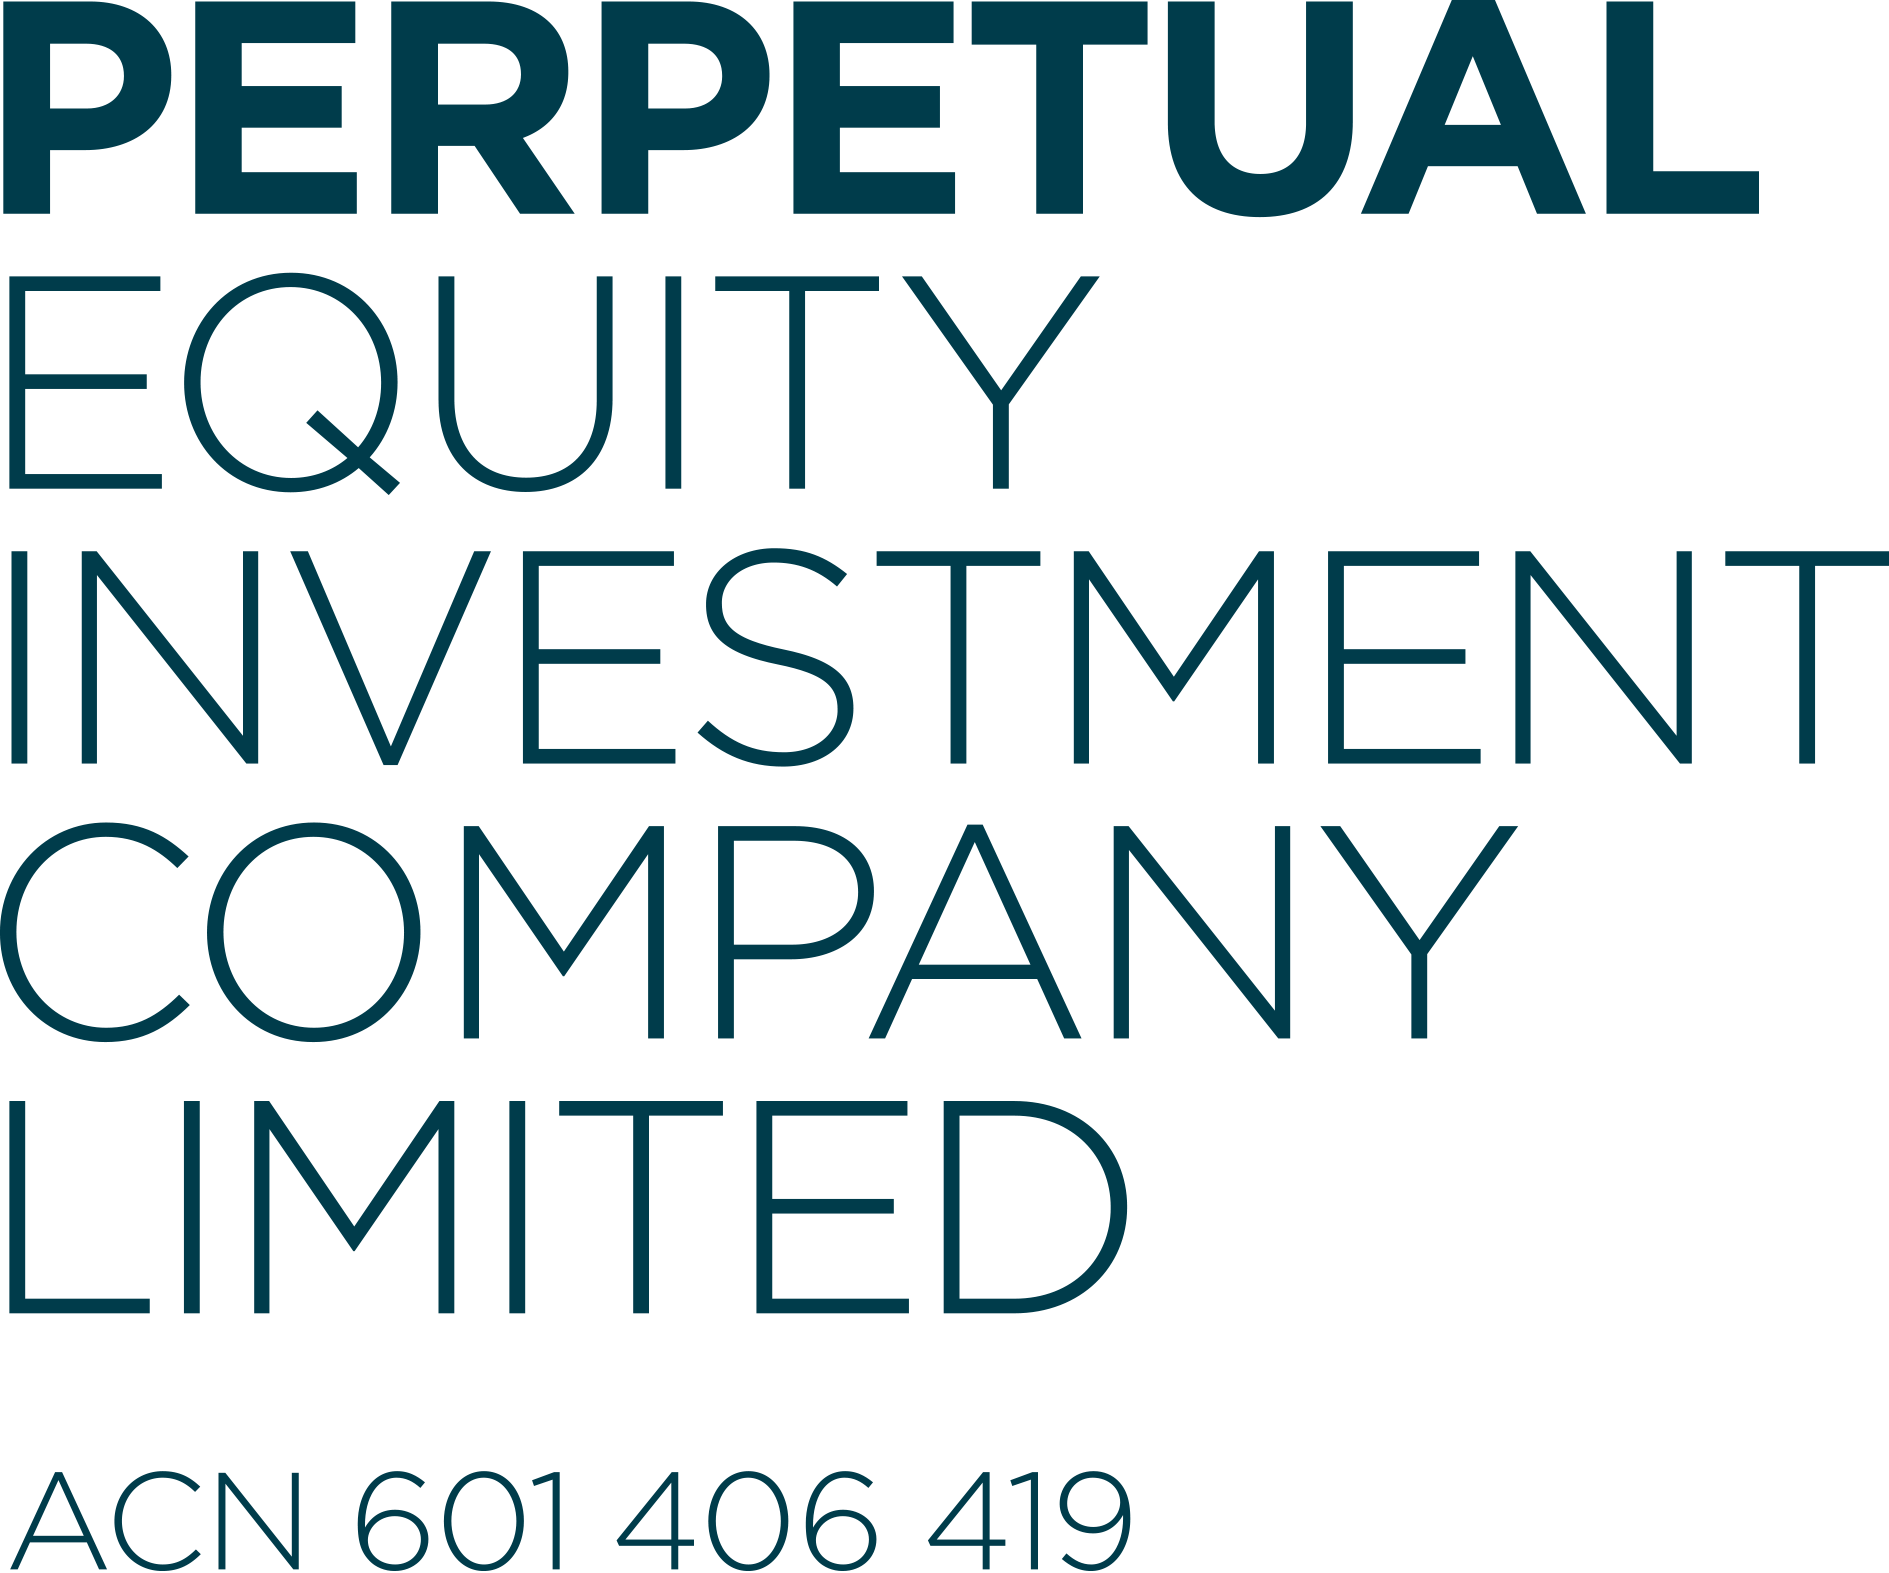 Perpetual Equity Investment Company Limited Logo